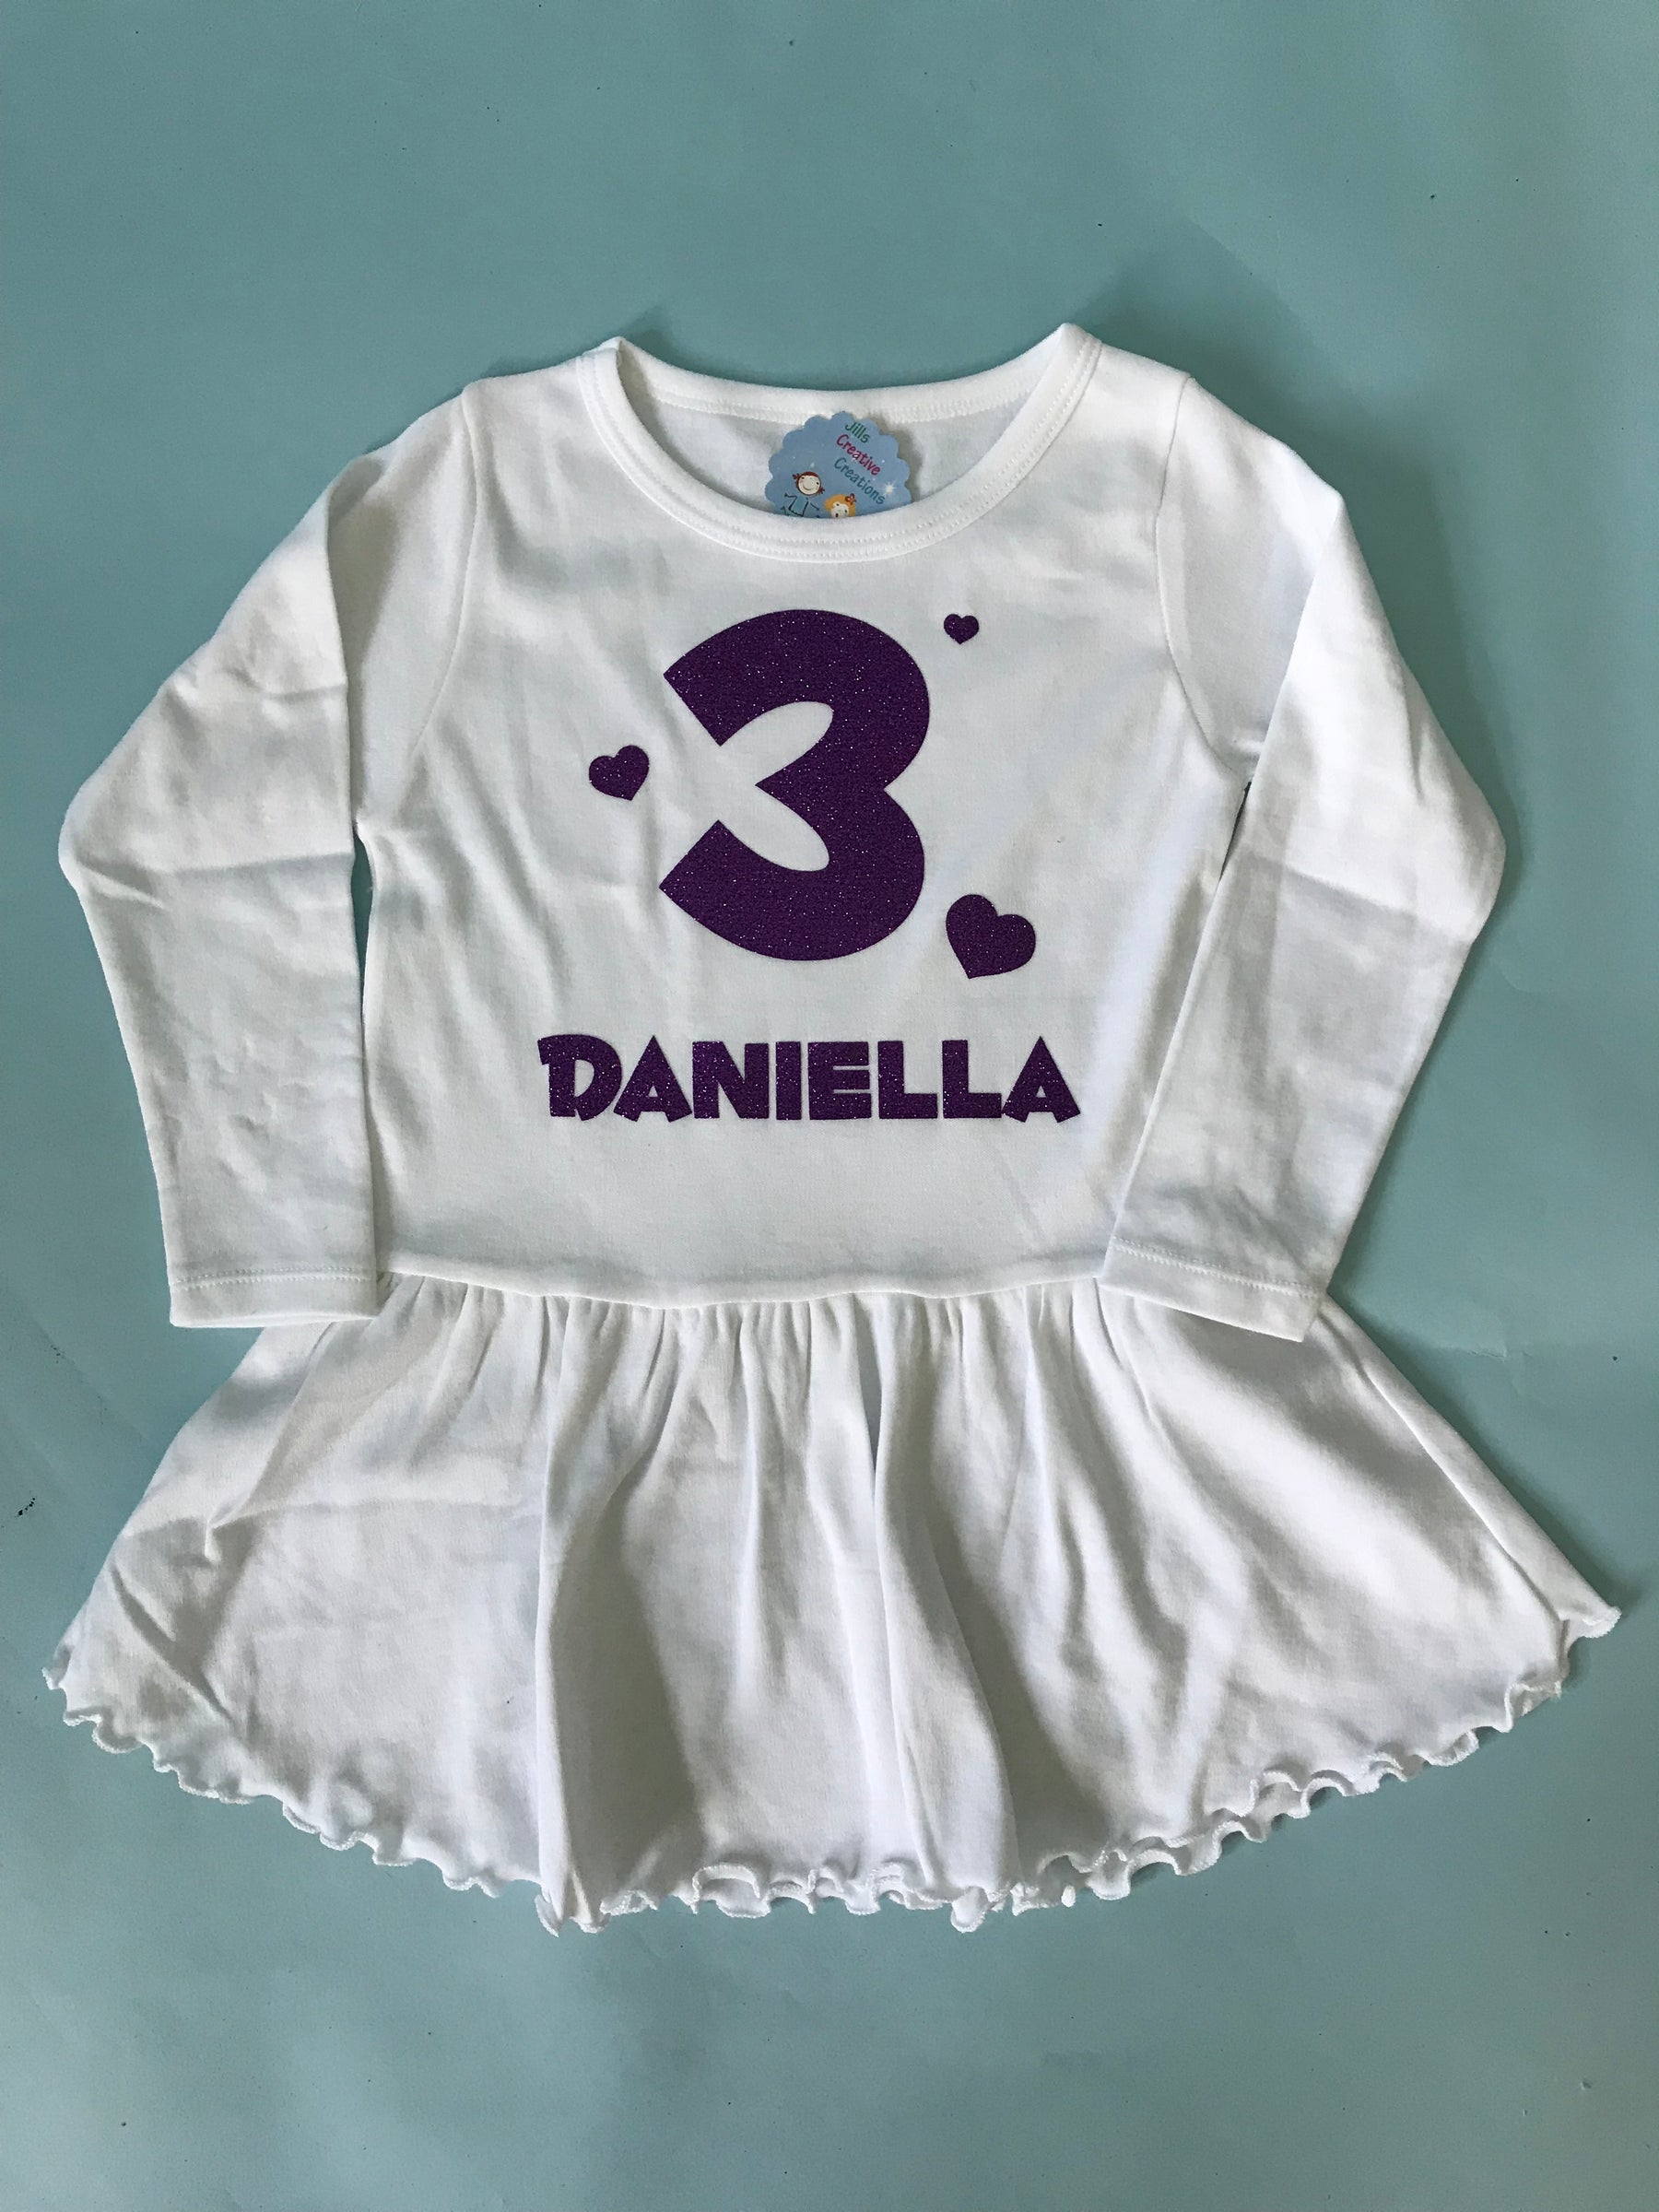 Birthday age and name dress